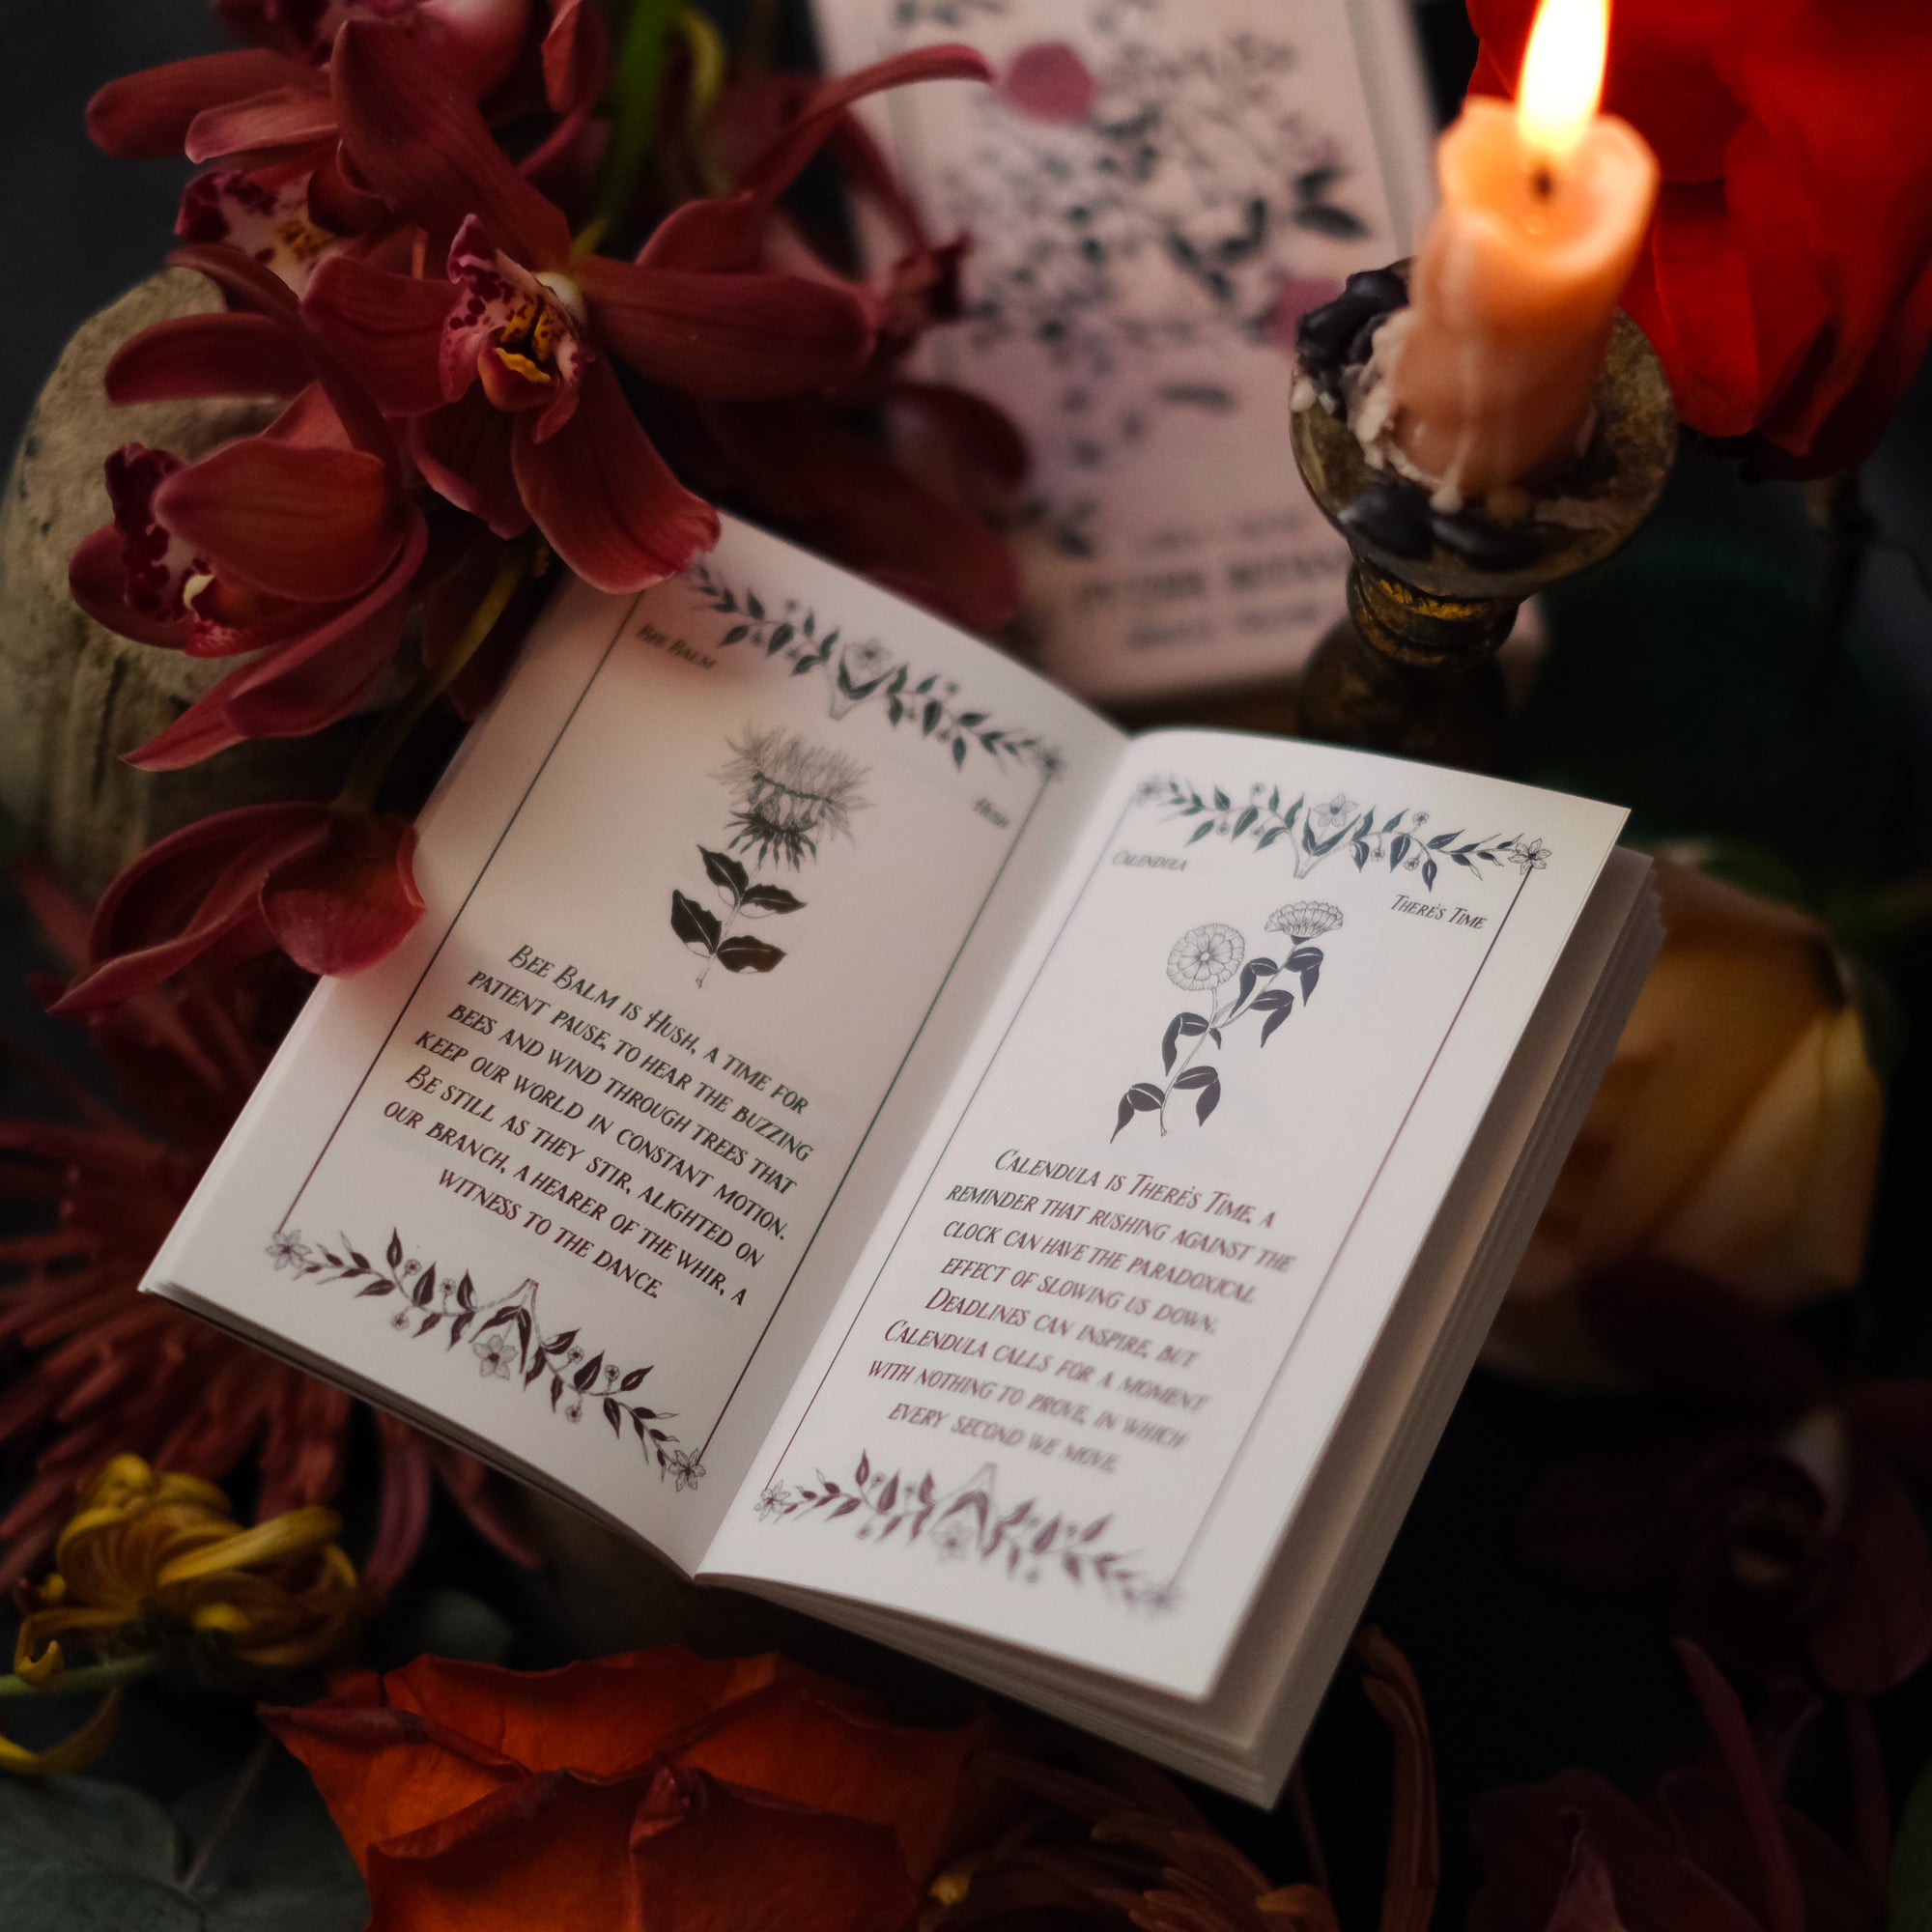 Pythia Botanica Oracle Volume II is illustrated by hand and rooted in plant magic, the natural world, and ancient mythology. Through 48 botanical oracle cards, we explore the plant world and all of the mystery, magic, wisdom and wonder it provides.